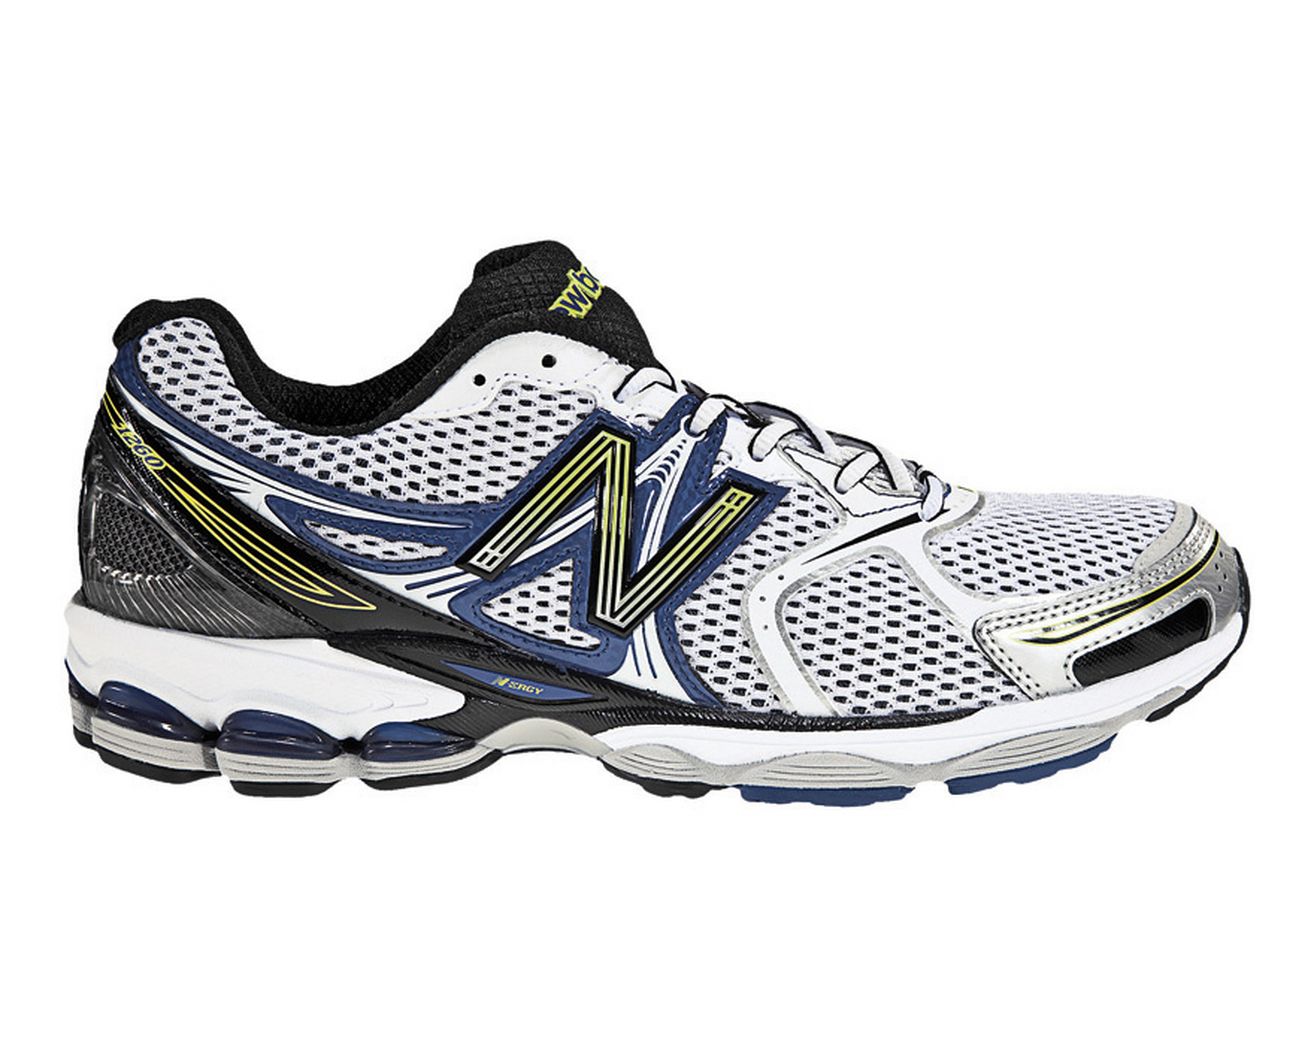 new balance 1050 running shoes,Save up to 16%,www.ilcascinone.com